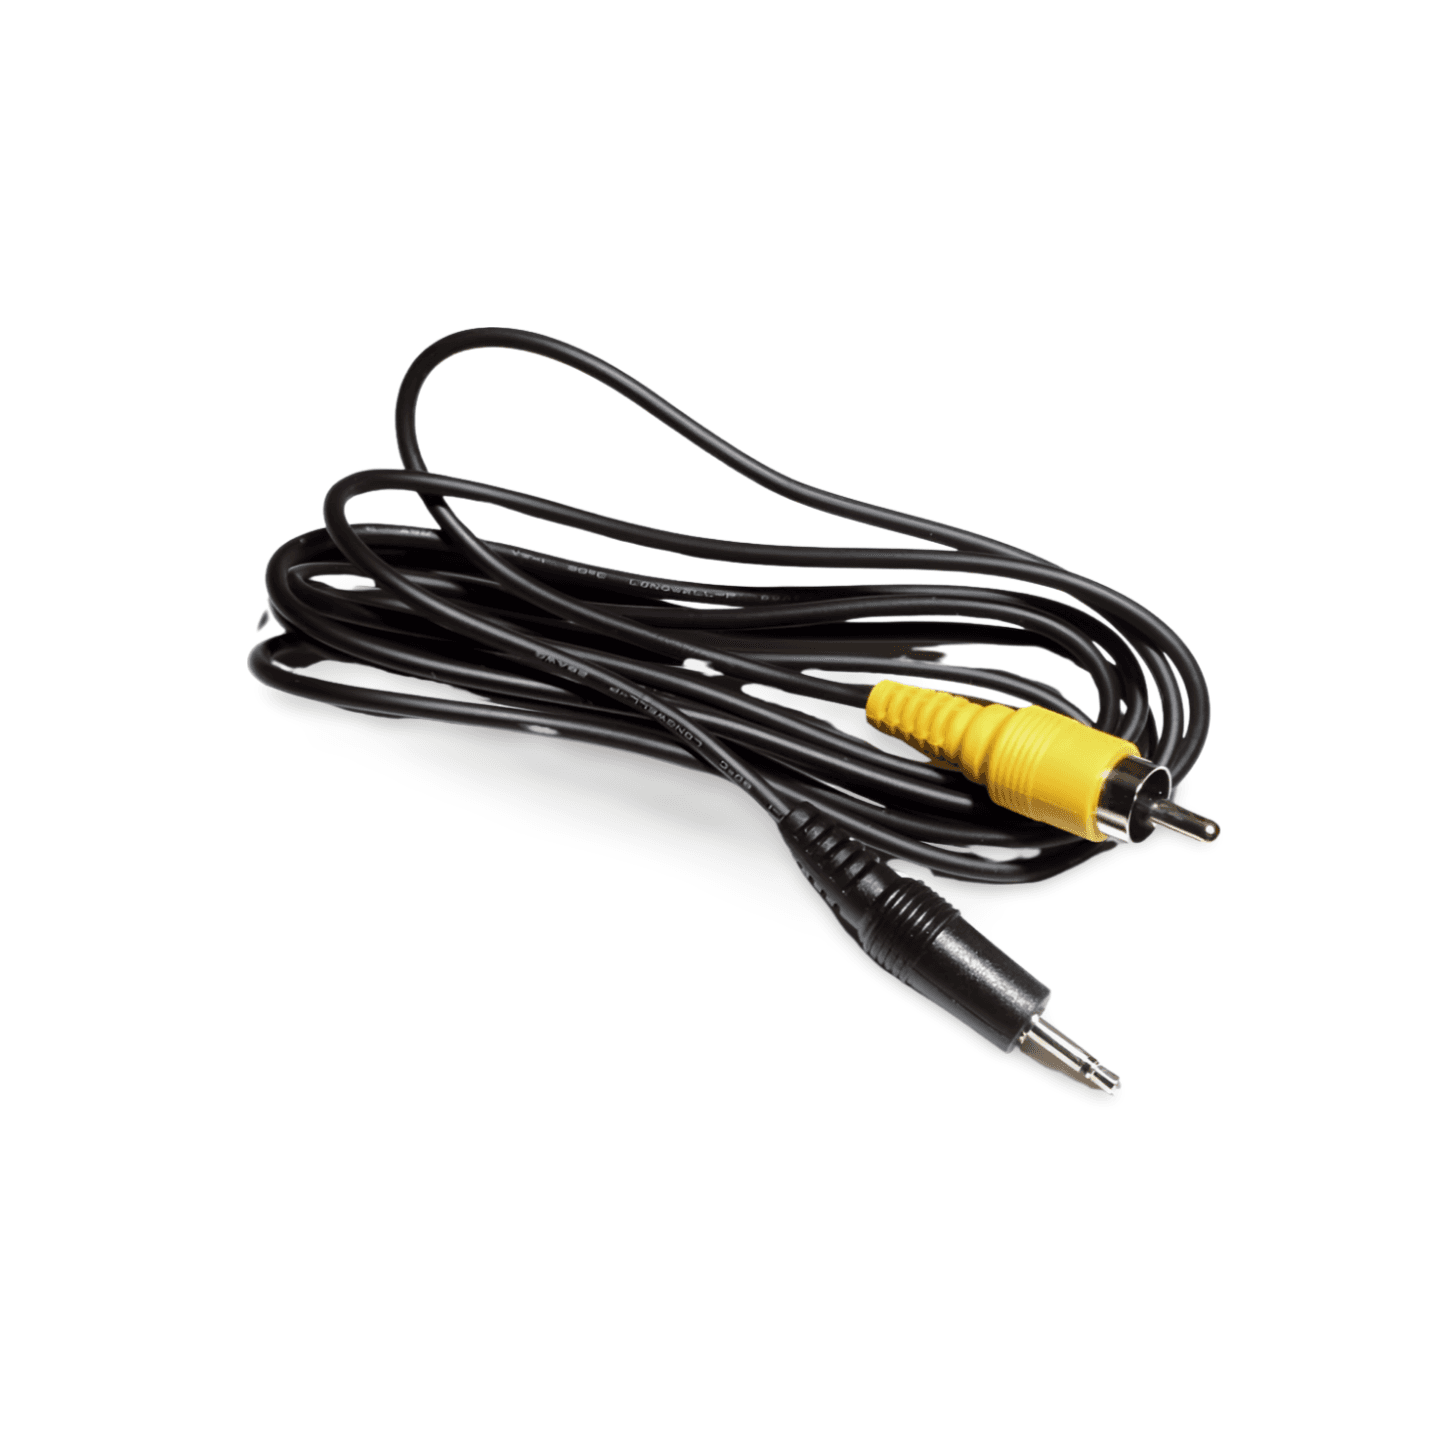 4ft 2.5mm to RCA Male Video Cable black